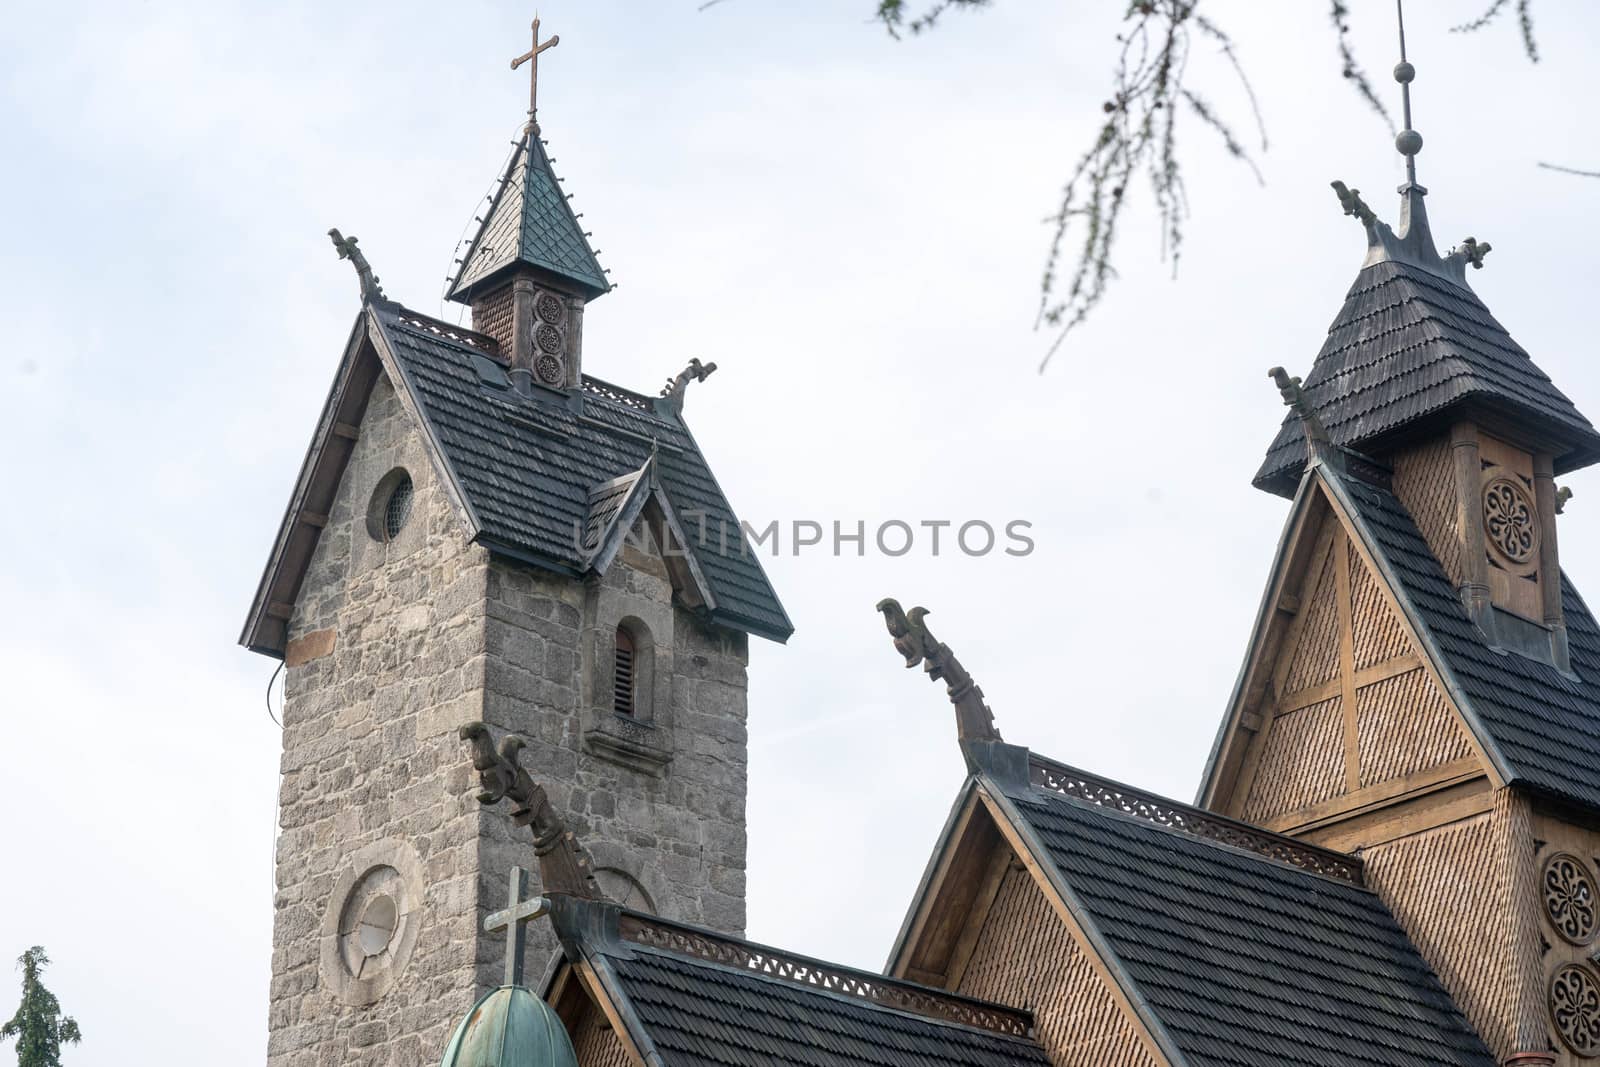 Mountain Church of Our Savior (commonly known as the Wang Church or Wang Temple) - an evangelical parish church in Karpacz in the Giant Mountains, moved in 1842 from the town of Vang, located on Lake Vangsmjøsa in Norway.